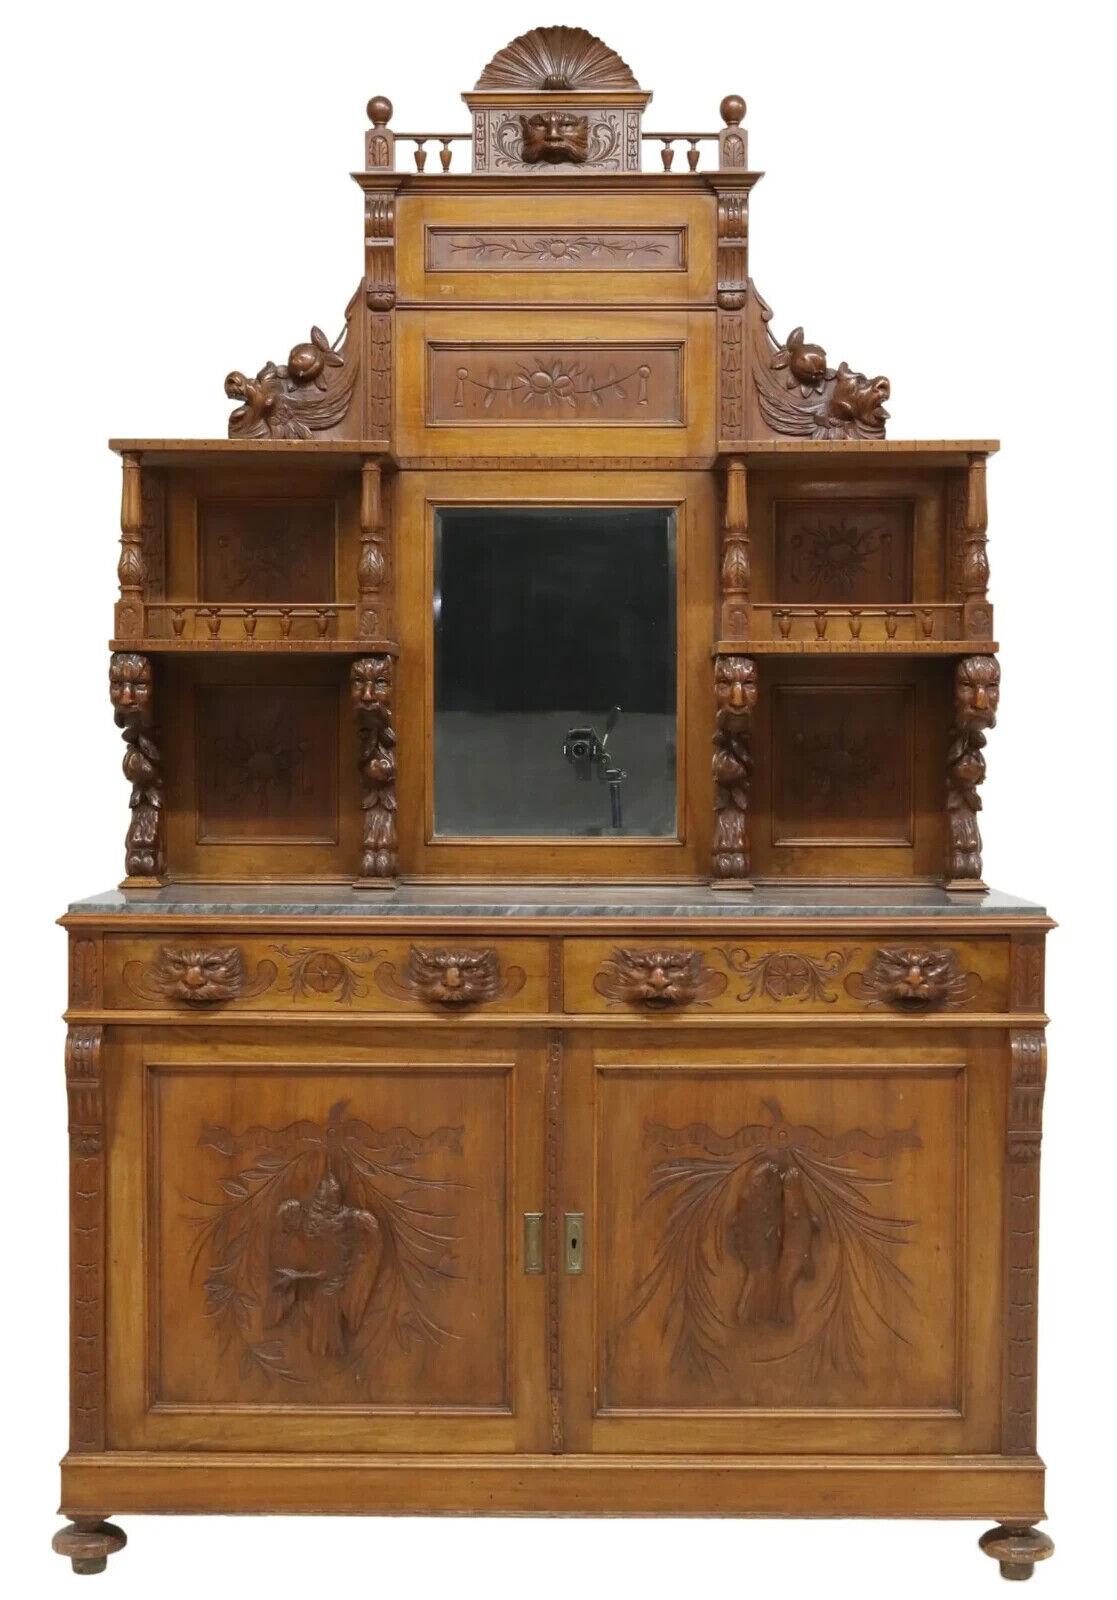 Gorgeous Antique Sideboard, Italian Renaissance Revival Carved, Mirror, Crest,  1800s, 19th Century!

This antique Italian Renaissance Revival sideboard is a stunning piece of furniture that is sure to impress. The carved walnut material and